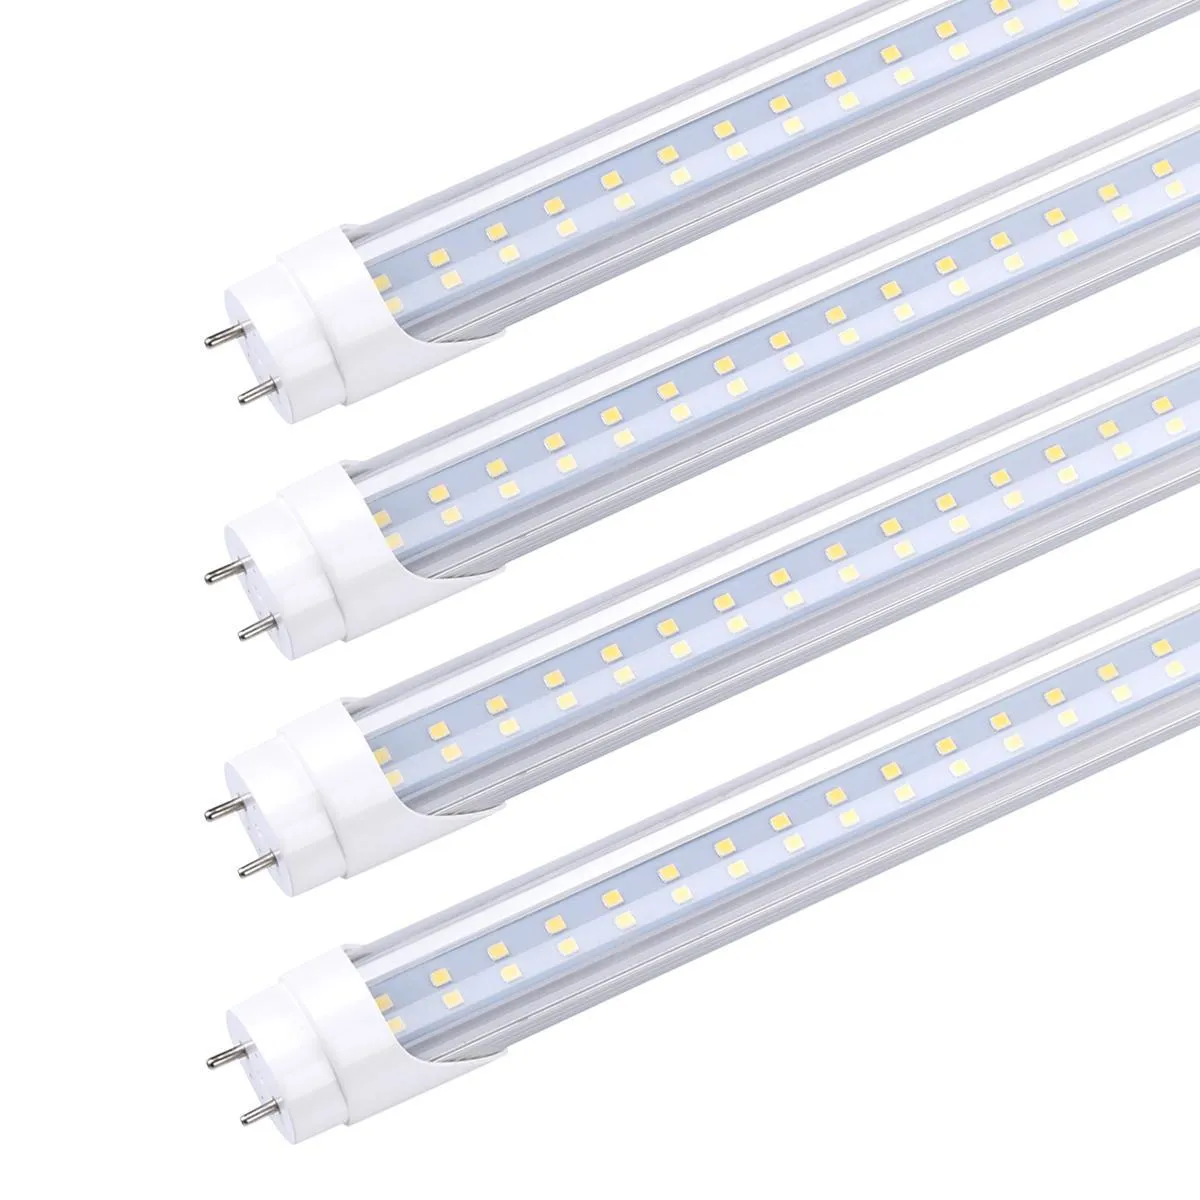 t8 led tube light bulb 4ft 22w 28w g13 bipin t8 t10 t12 fluorescent lighting bulbs replacement ballast bypass double ended power clear cover 4 foot shop